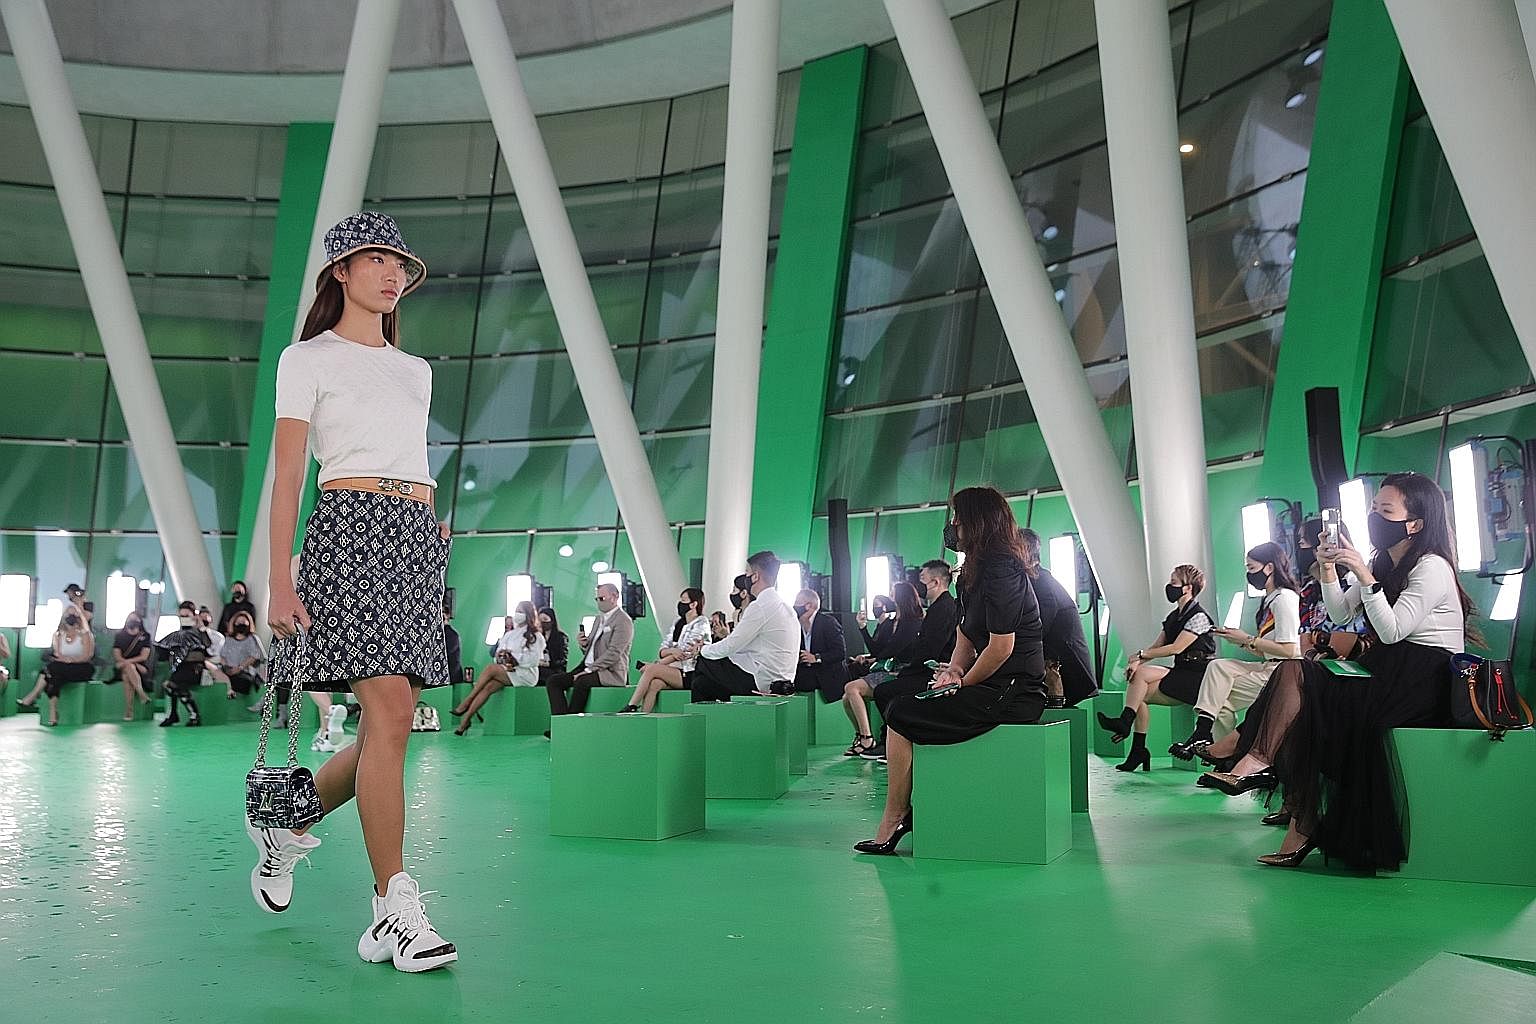 Life returned to the runway yesterday, with the first full-fledged fashion show staged in Singapore since the pandemic began. The ArtScience Museum basement was transformed into an emerald city for the Louis Vuitton show, presented live to 112 guests